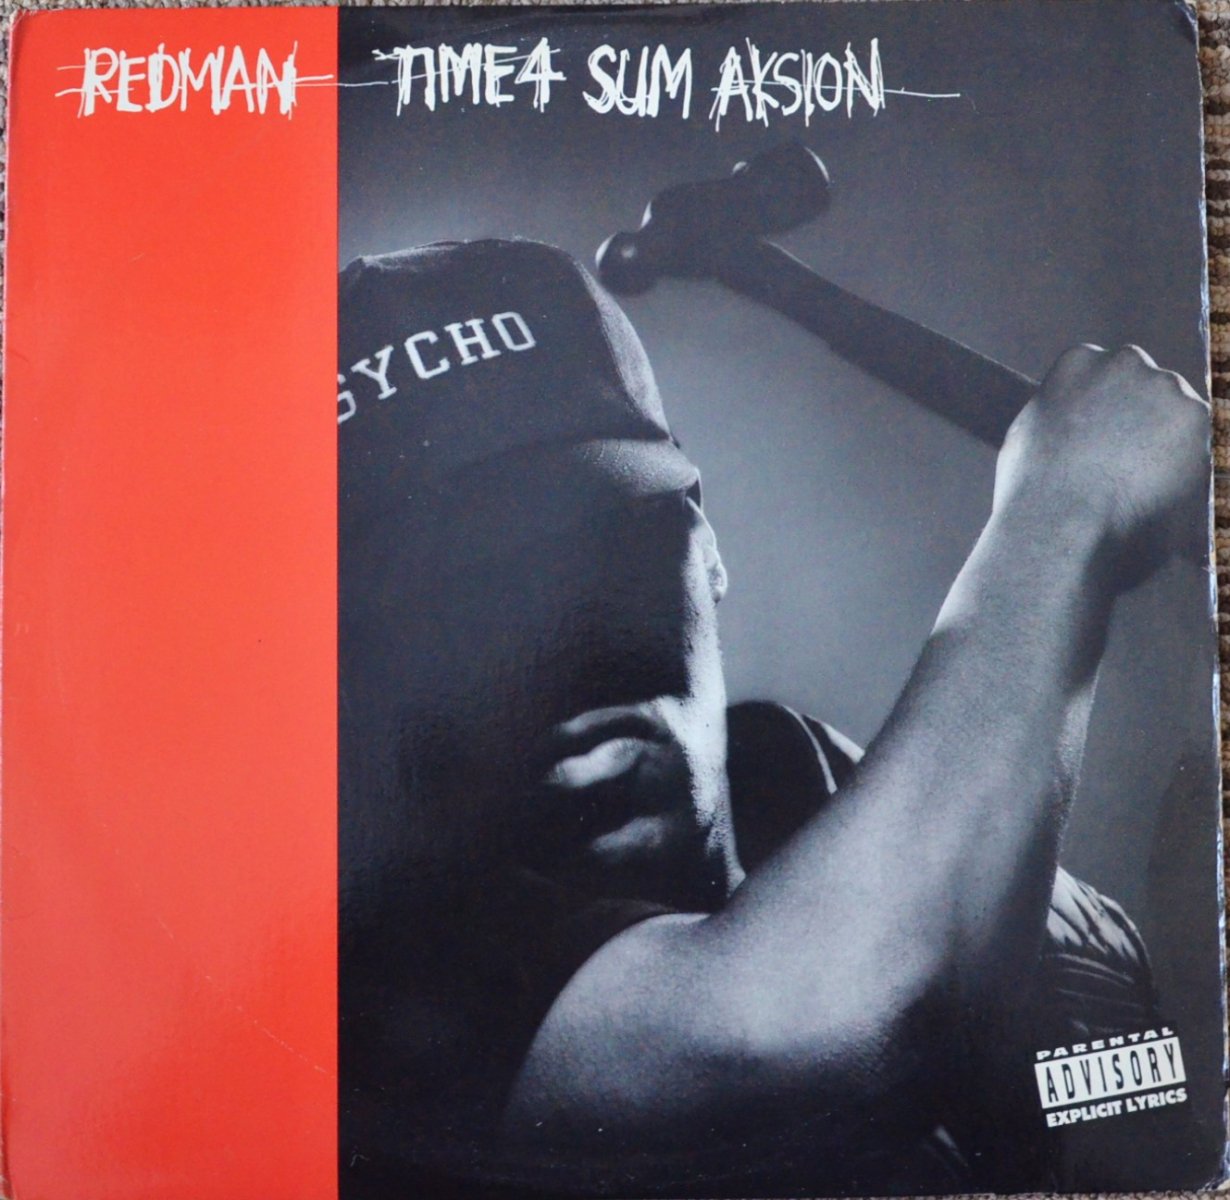 REDMAN ‎/ TIME 4 SUM AKSION / RATED 